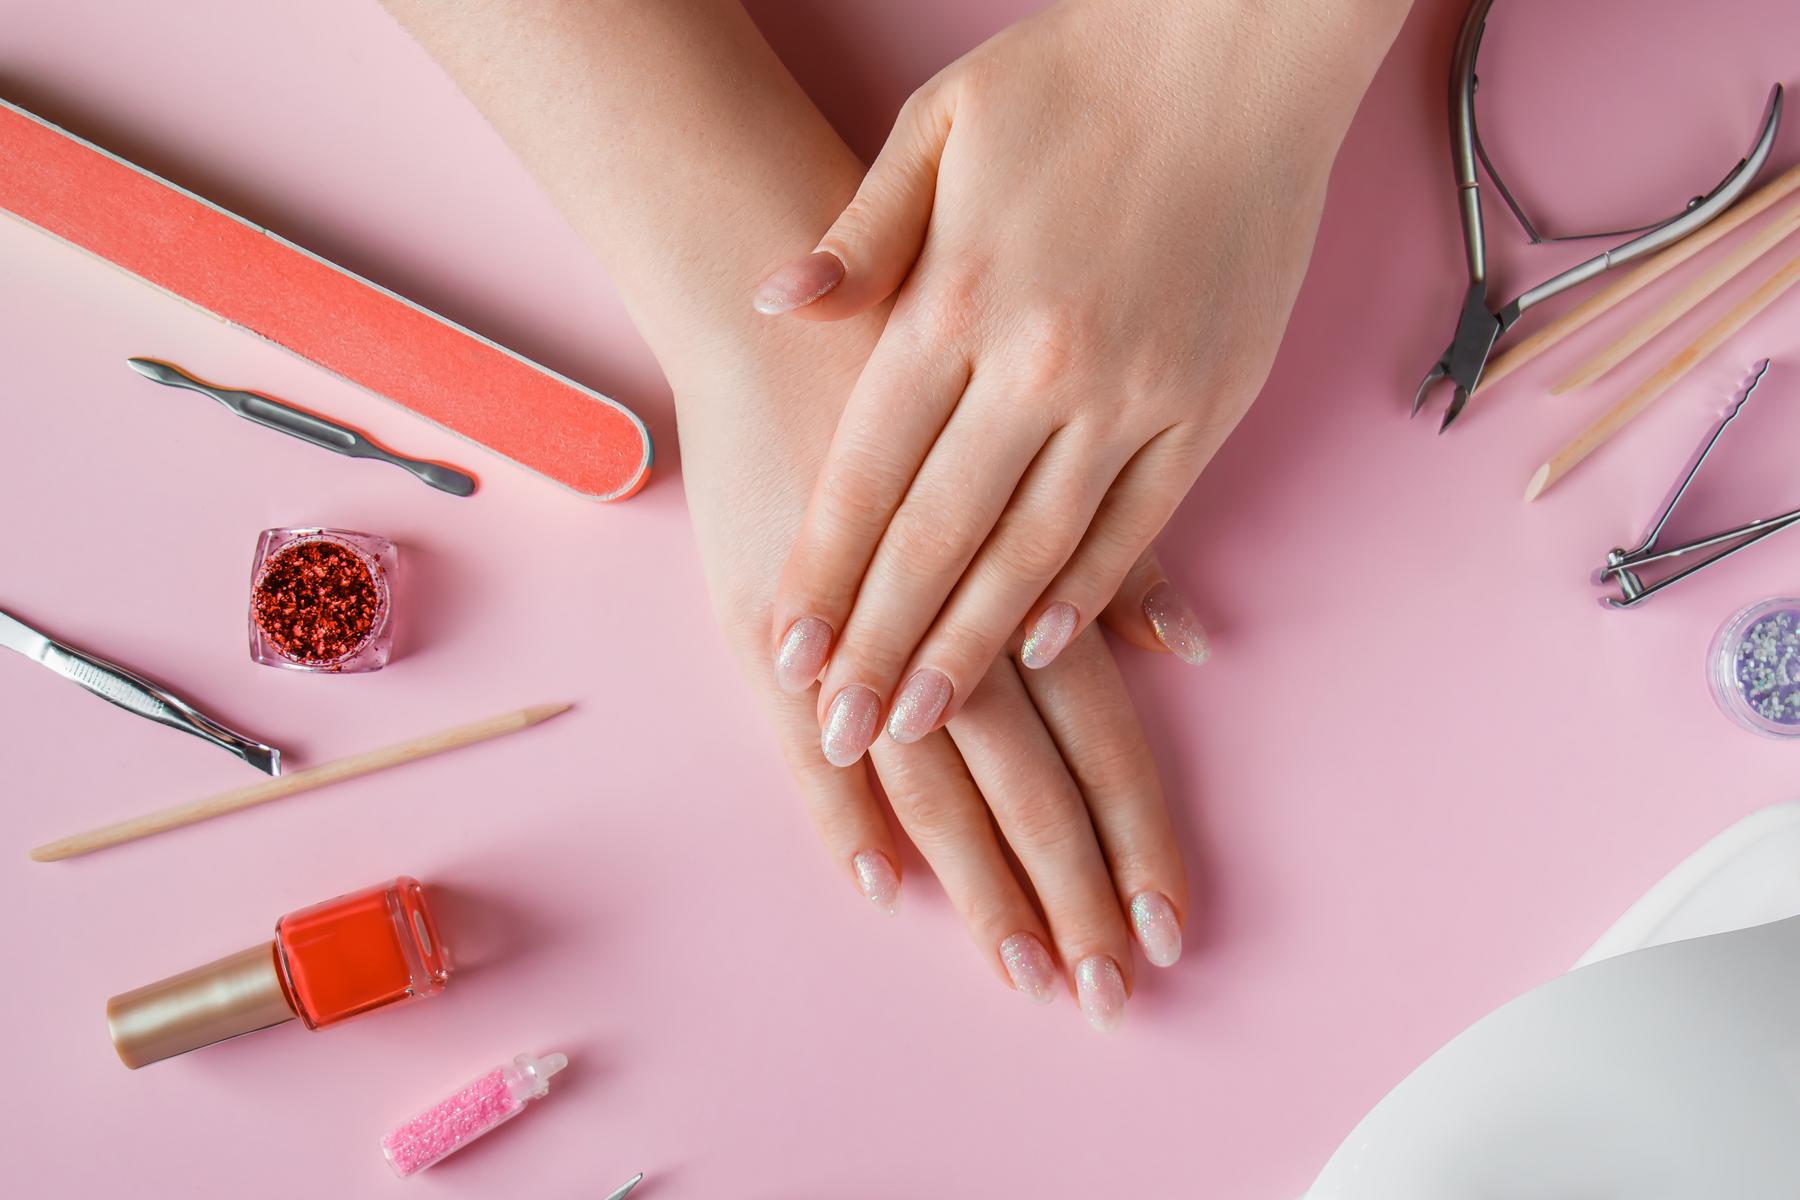 nail care procedure in a beauty salon. female hands and tools for manicure on pink background. concept spa bodycare.